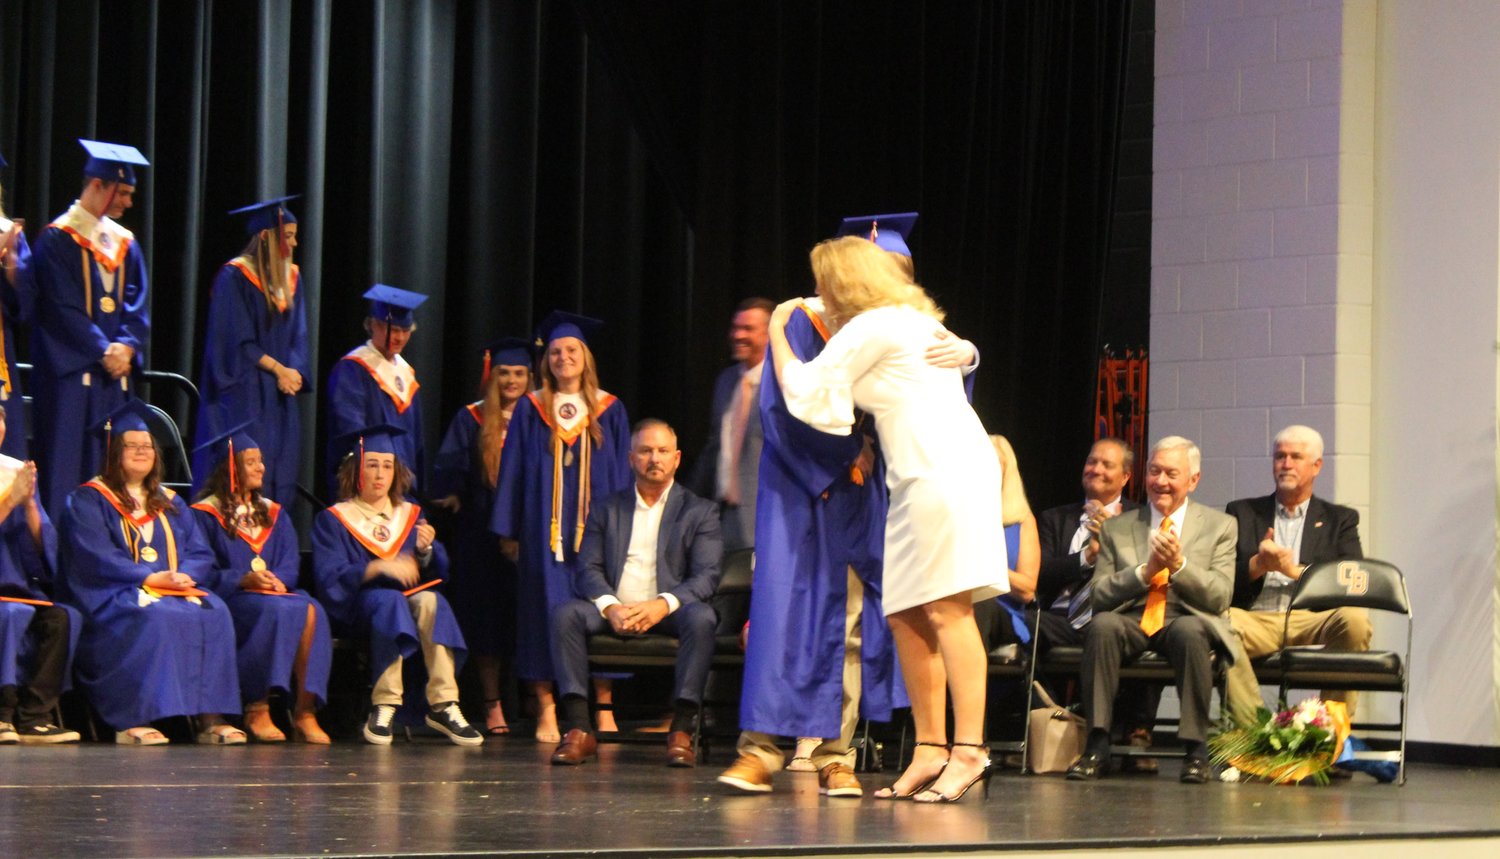 Former Orange Beach High School principal Robbie Smith shook every hand and hugged almost every neck before the students crossed to receive their diploma.